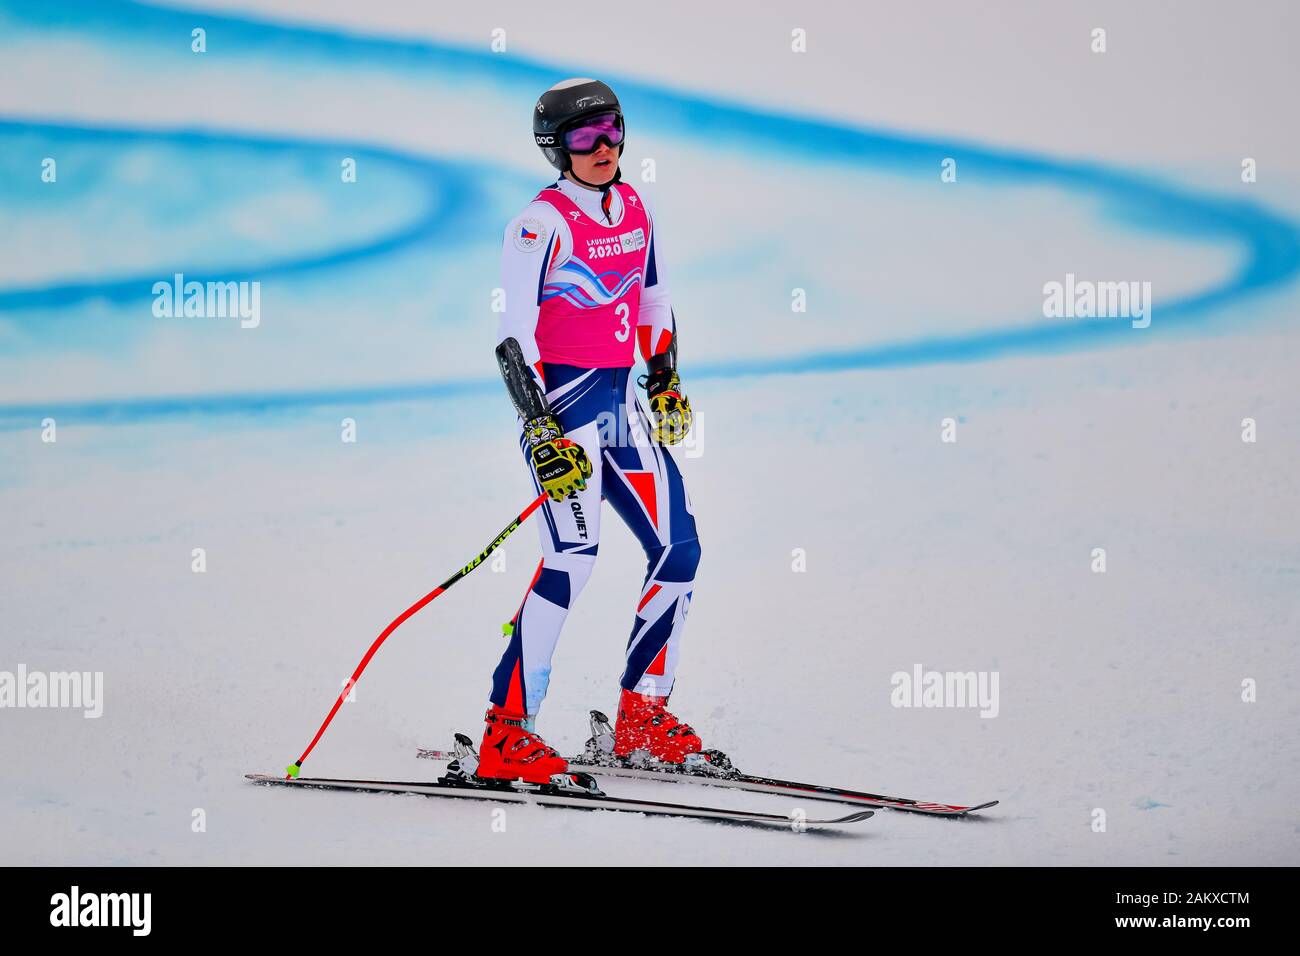 LAUSANNE, SWITZERLAND. 10th, Jan 2020. KUBES David (CZE) competes in Alpine Ski Mens Super G during the Lausanne 2020 Youth Olympic Games at Les Diablerets Alpine Centre on Friday, 10 January 2020. LAUSANNE, SWITZERLAND. Credit: Taka G Wu/Alamy Live News Stock Photo